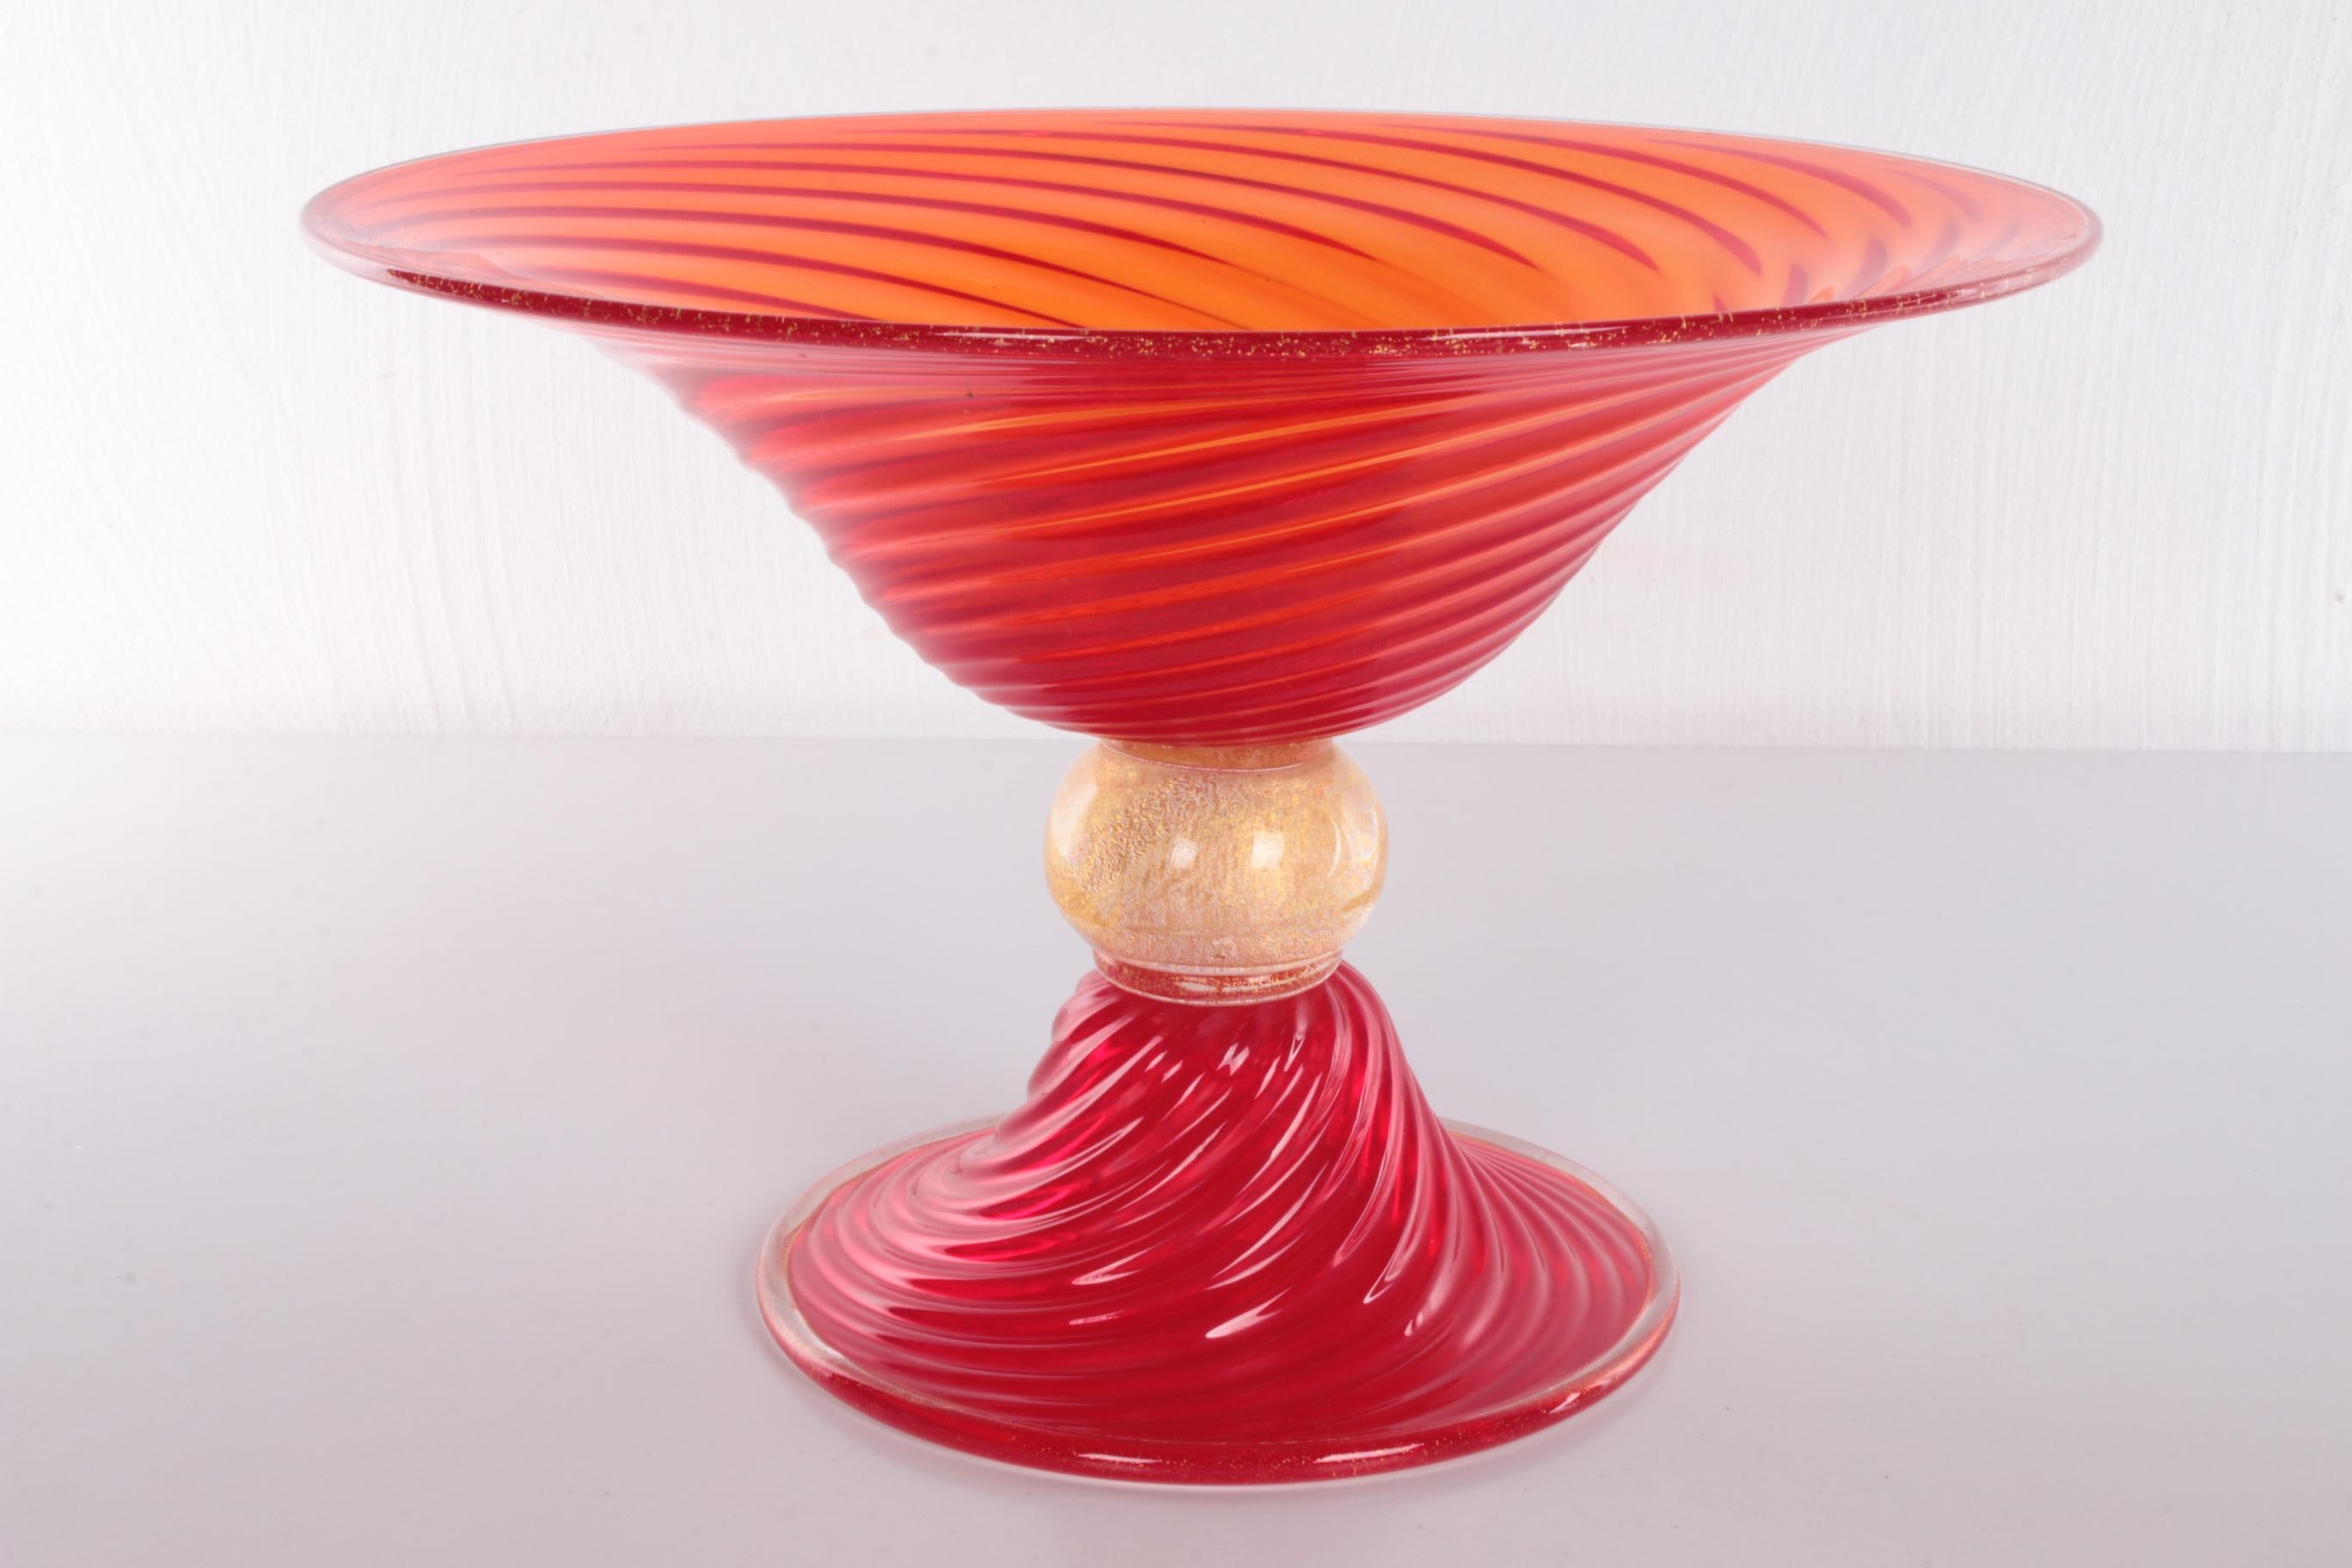 Red Gold Murano Cup seguso vetri d'arte


The Seguso family has been devoted to the art of Murano glass in Venice since May 3, 1397.

Seguso is one of the most esteemed, historic and respected glass manufacturers on the island, and one of the